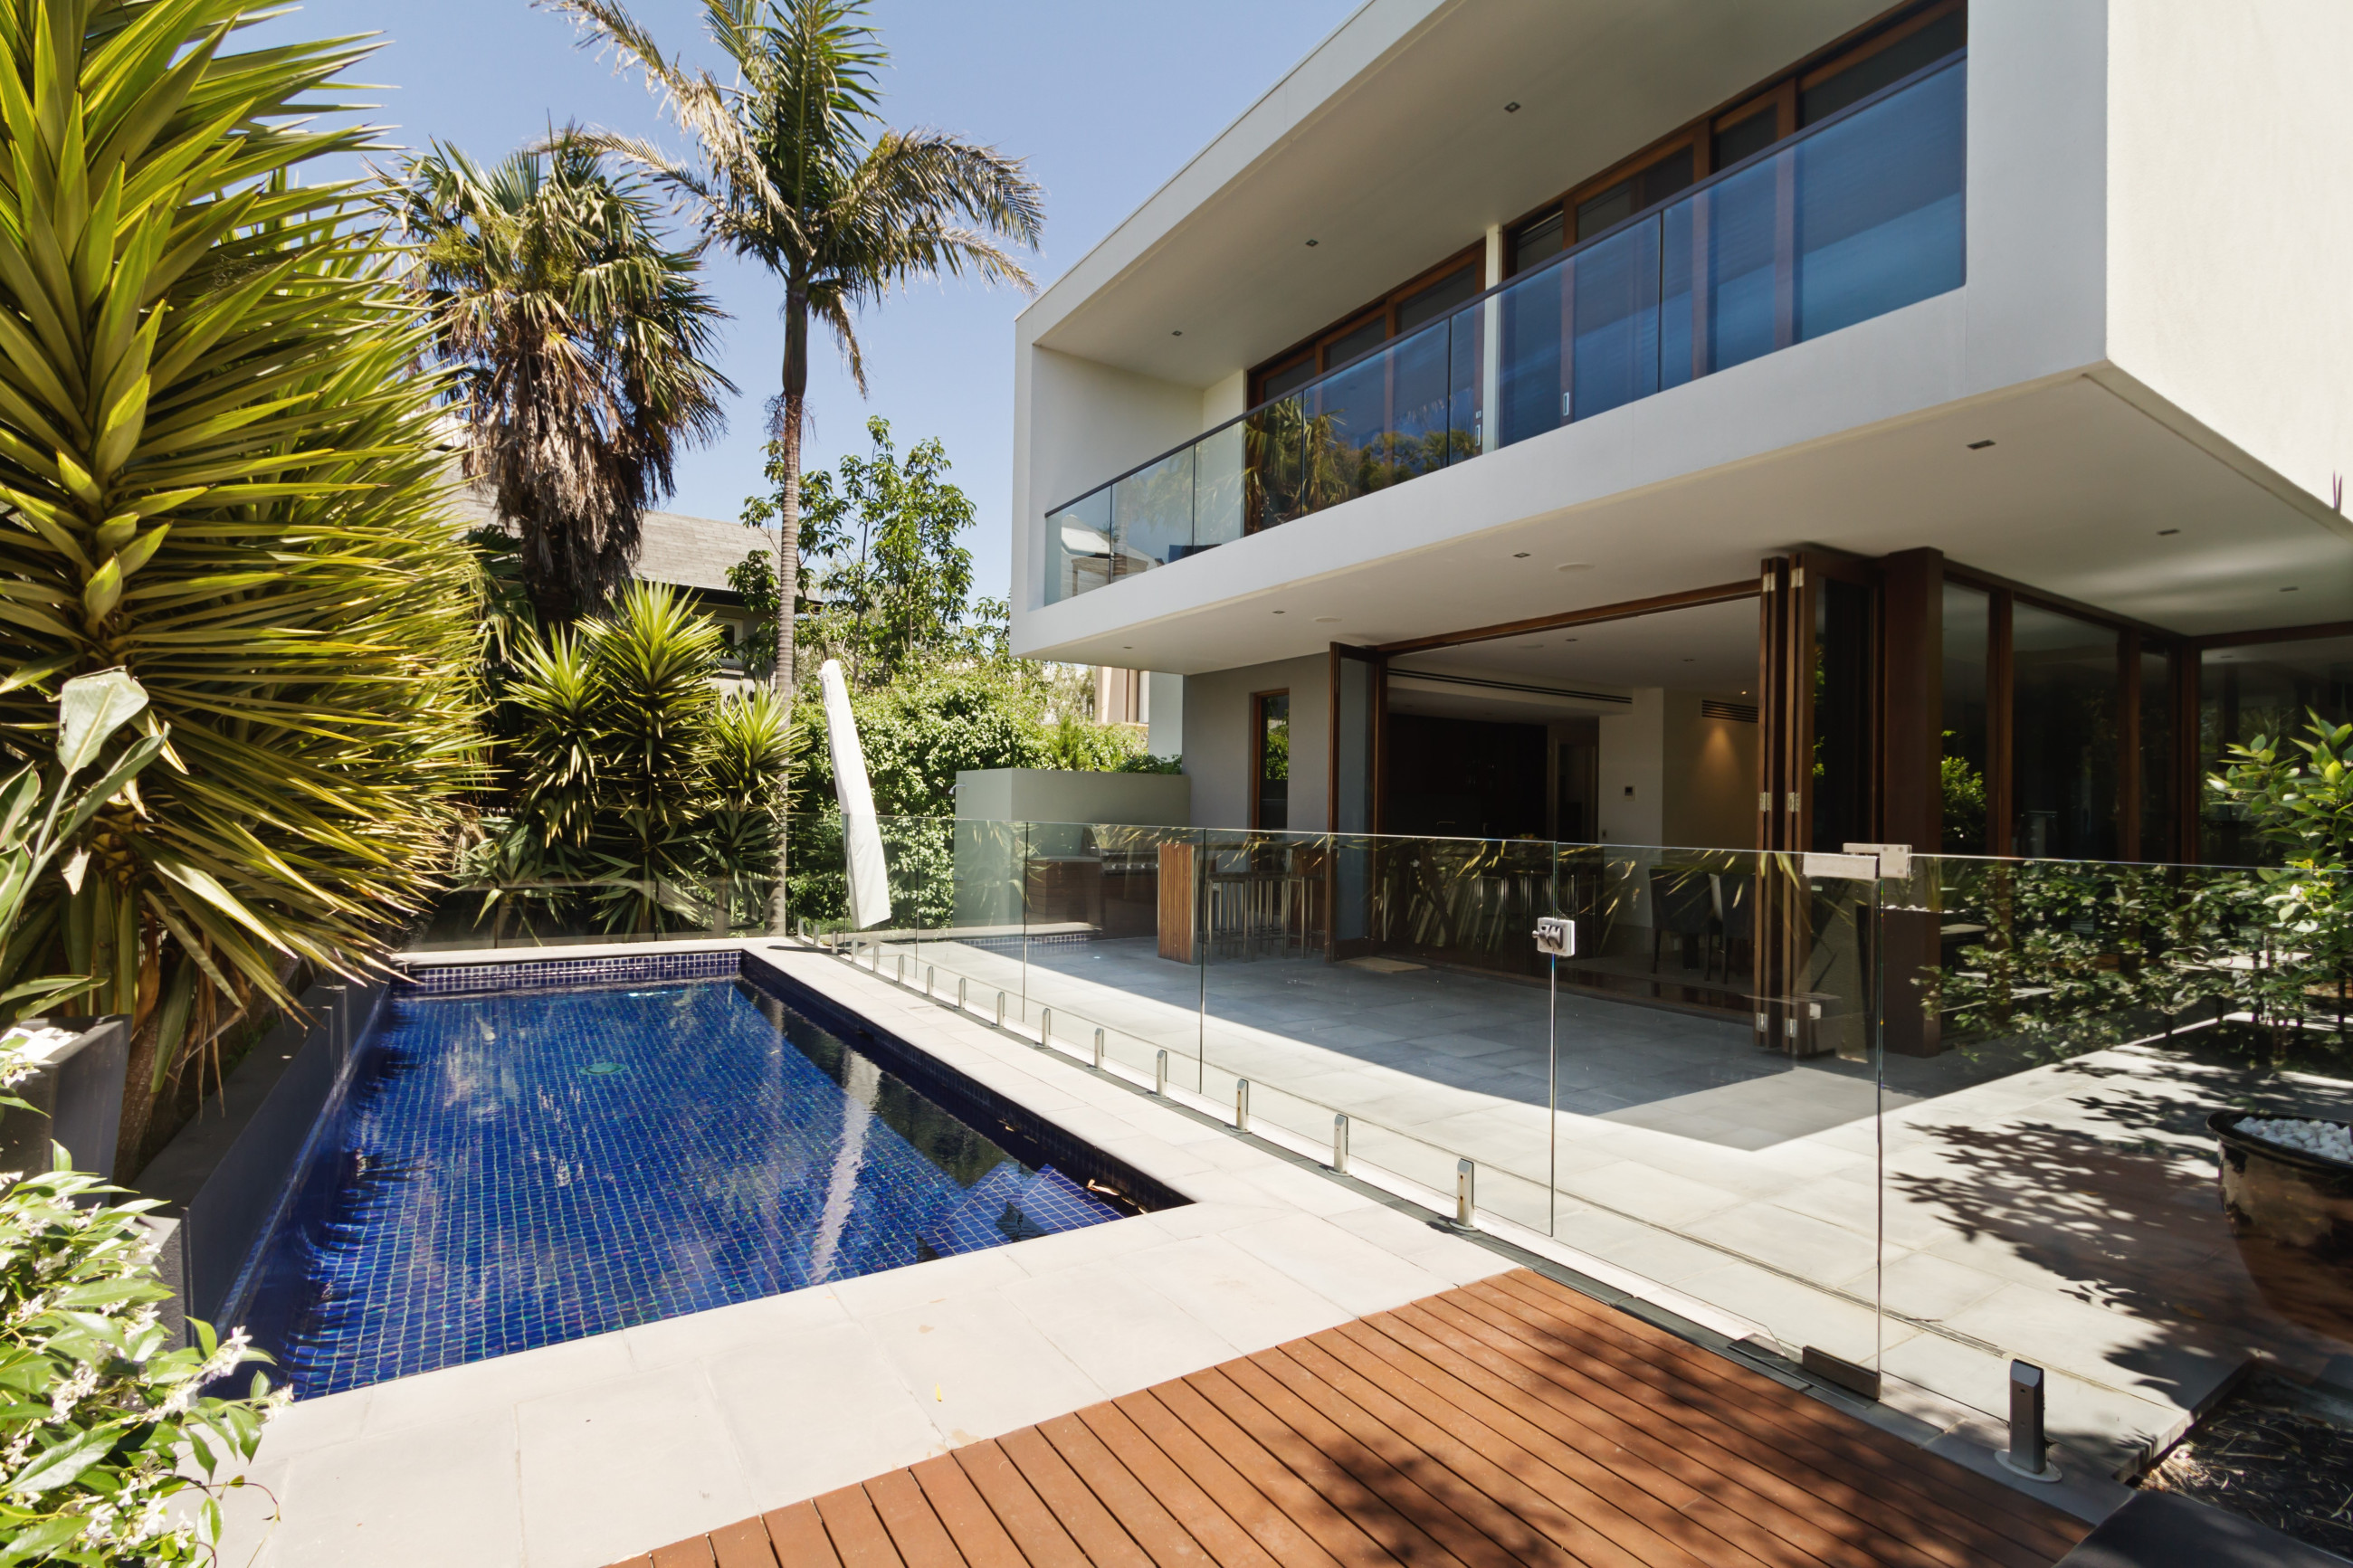 Luxurious private residence with a clear glass balustrade surrounding an inviting blue-tiled swimming pool